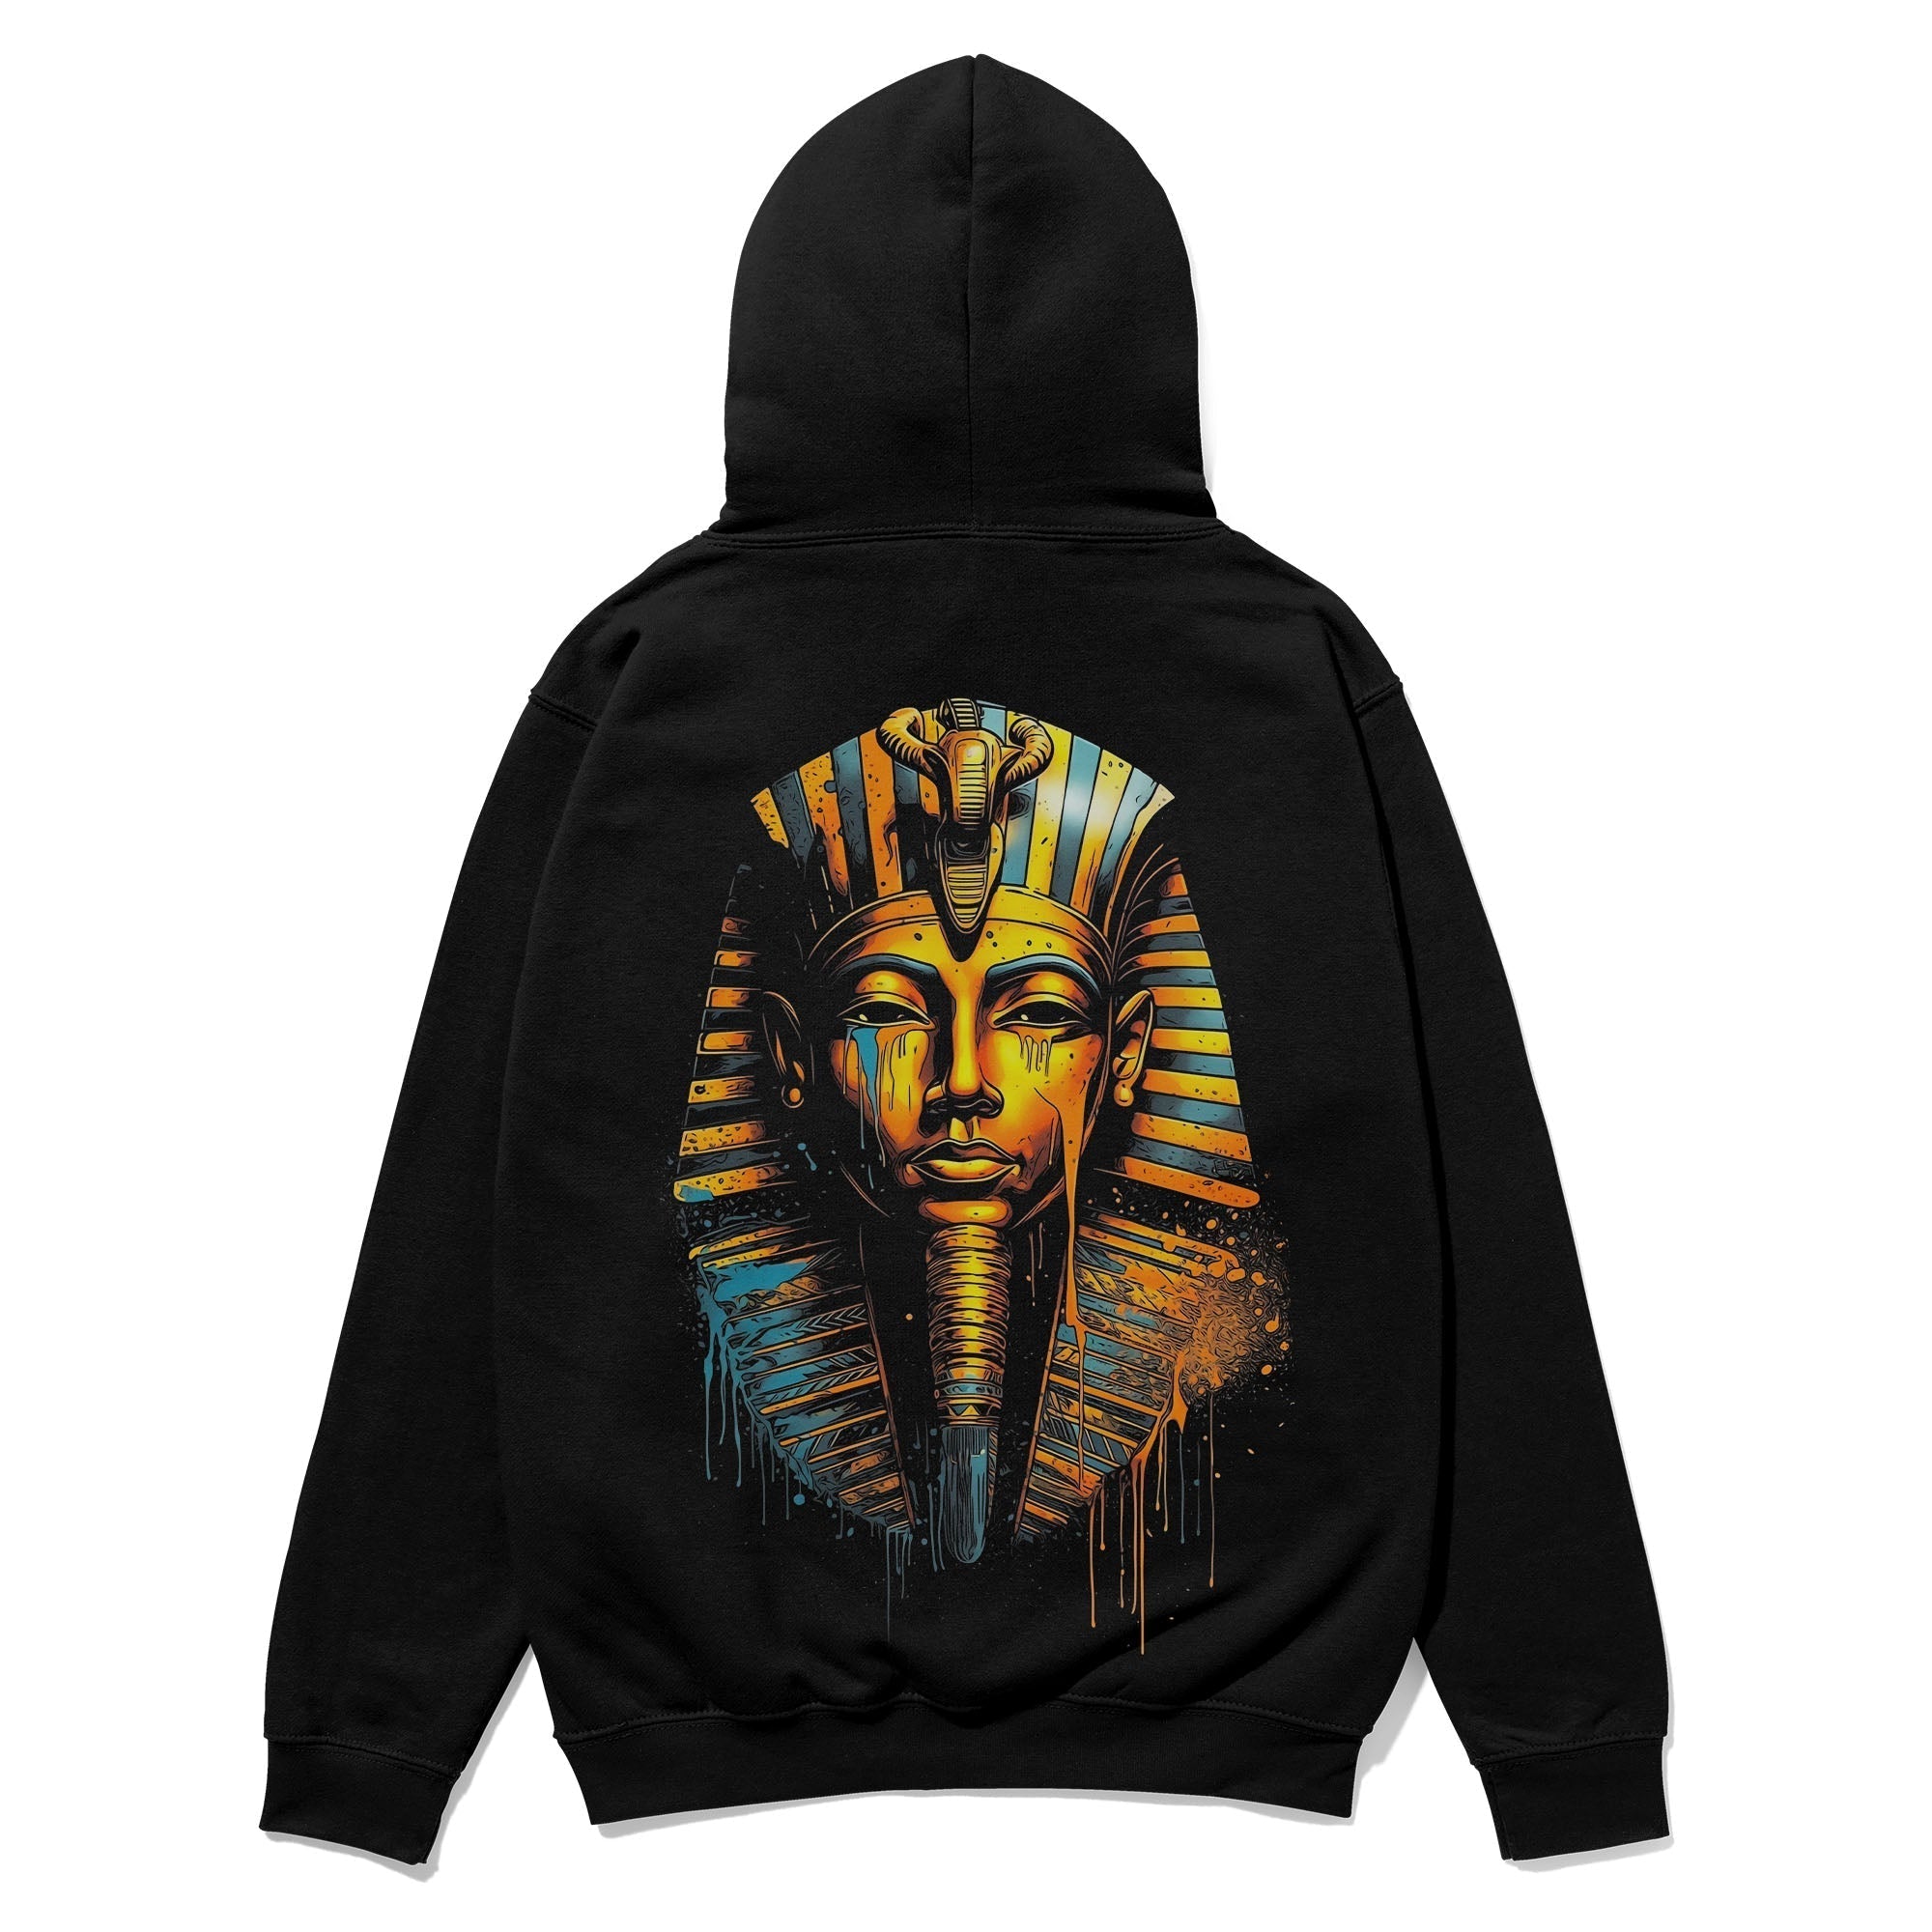 Decoding the Popularity Behind Graphic Hoodies